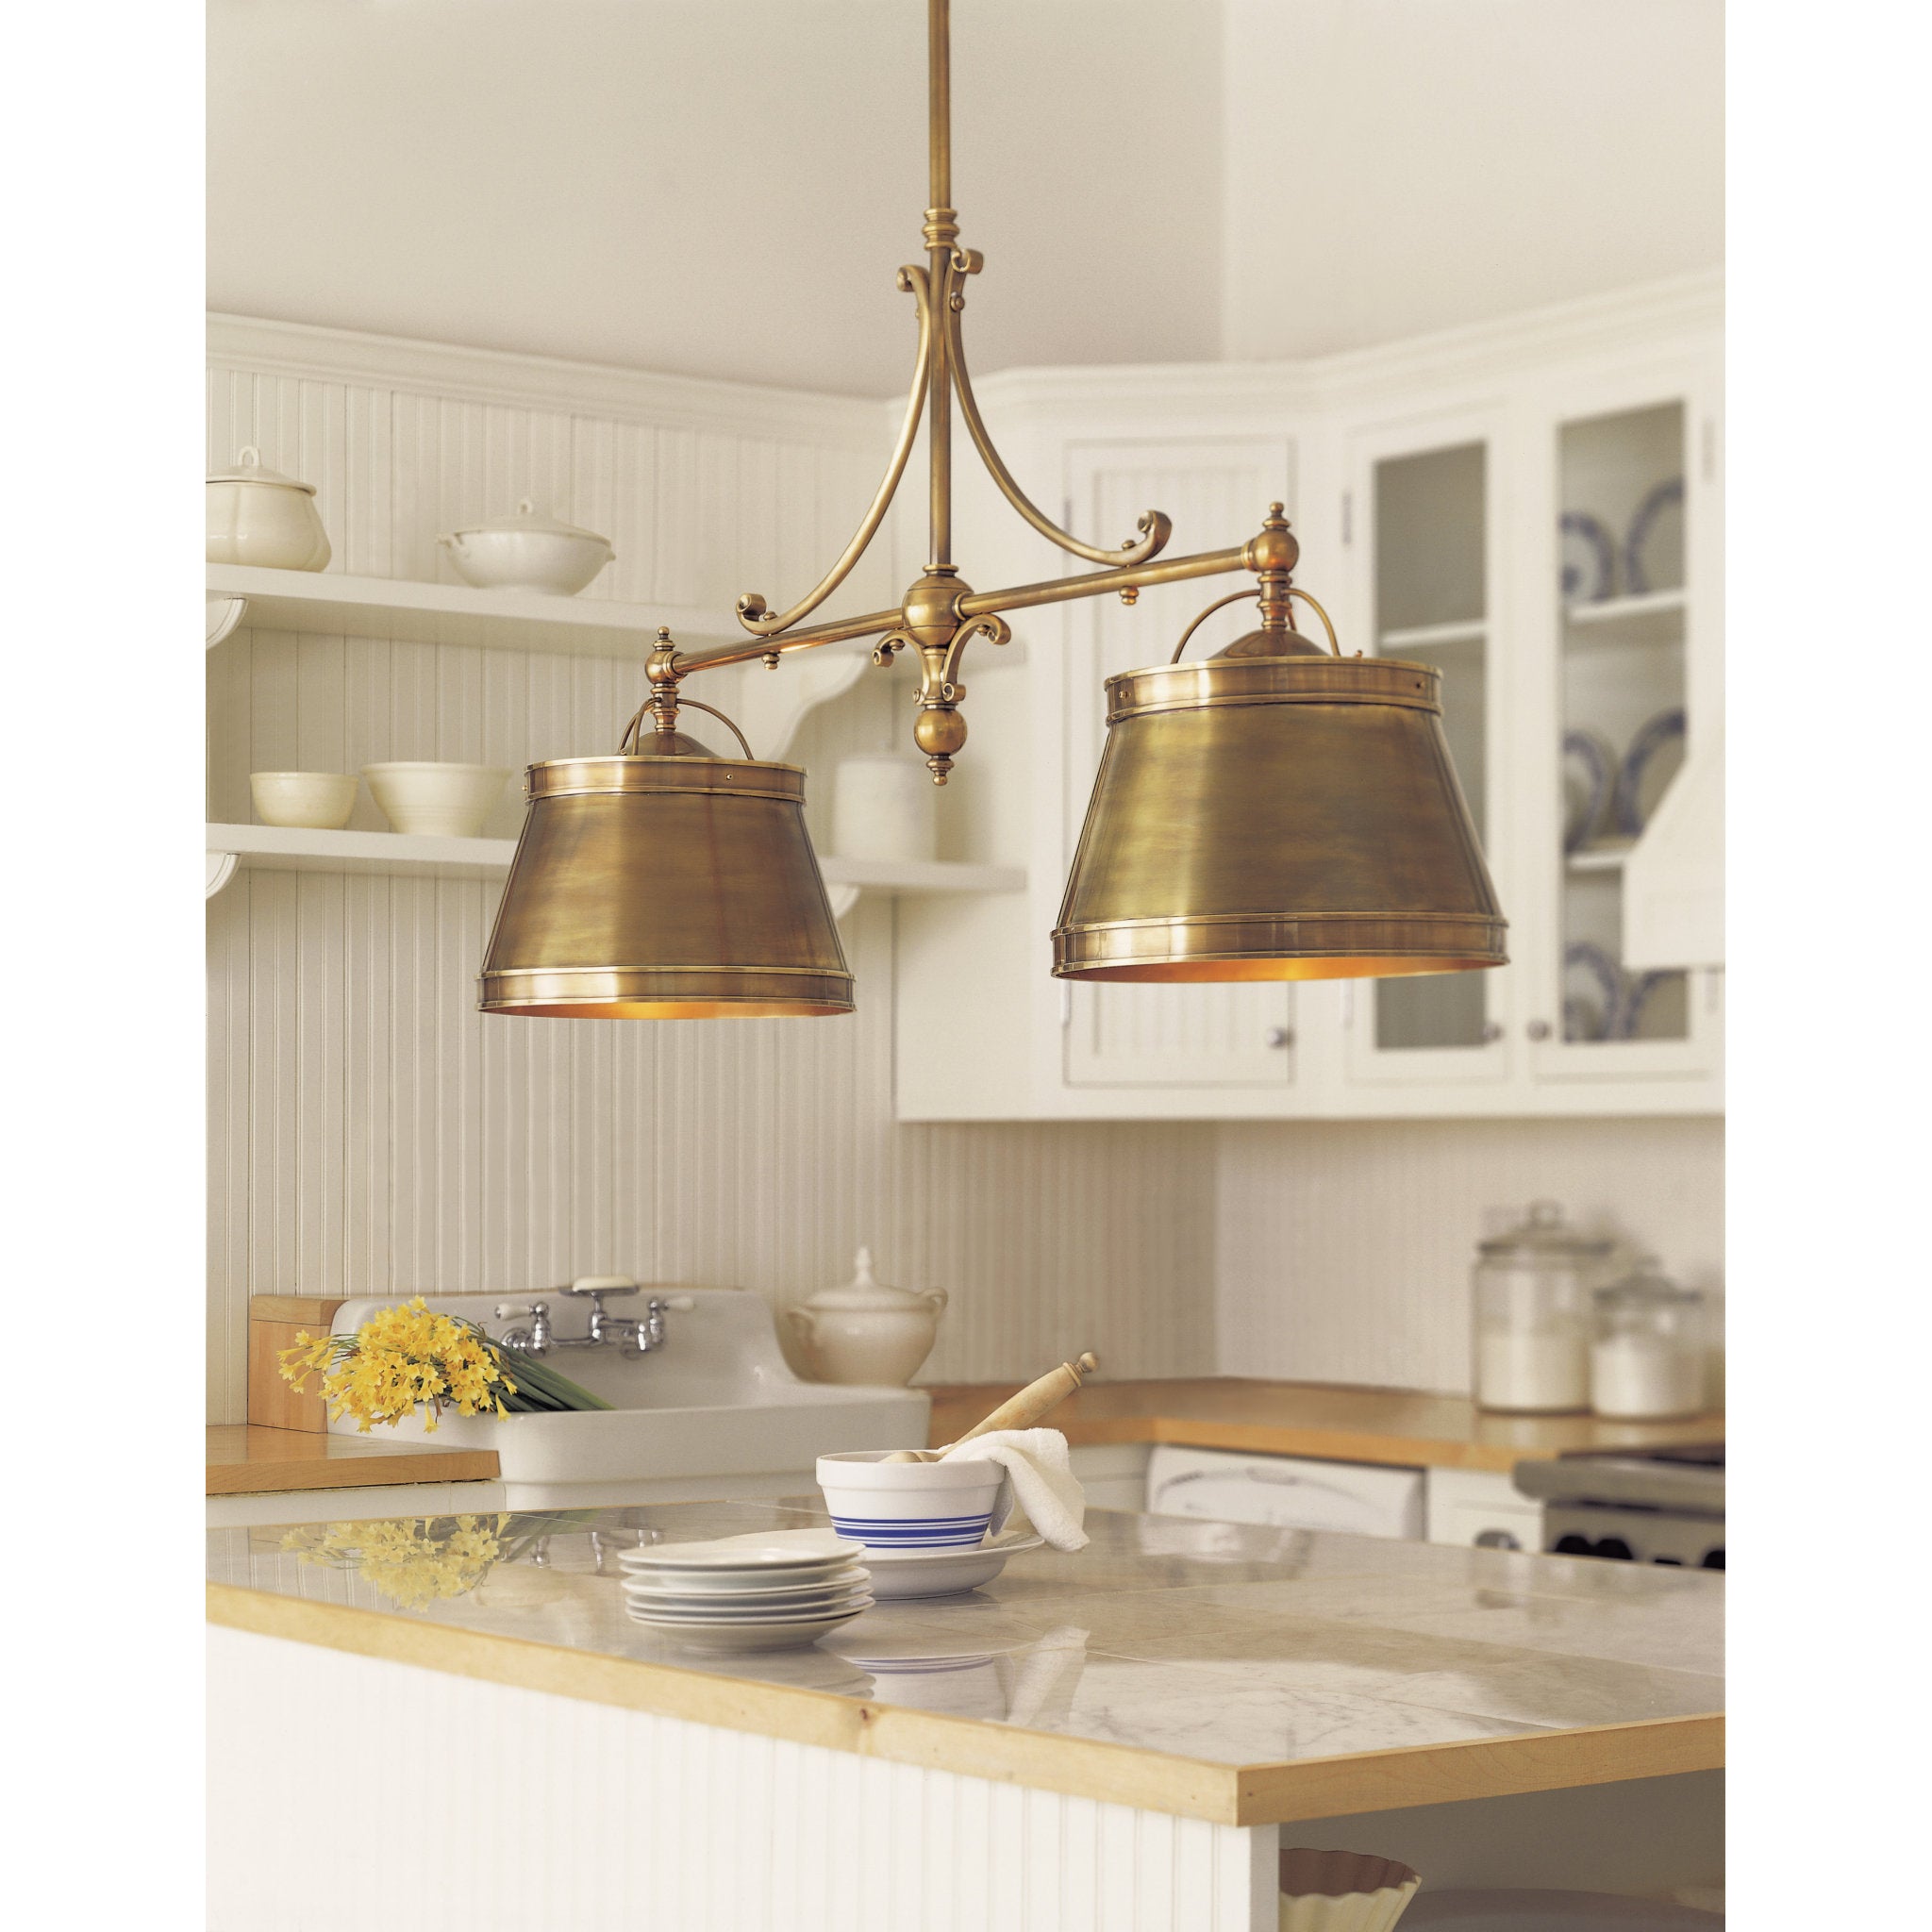 E.F. Chapman Country Industrial Pendant in Bronze by Visual Comfort  Signature, CHC5133BZWG